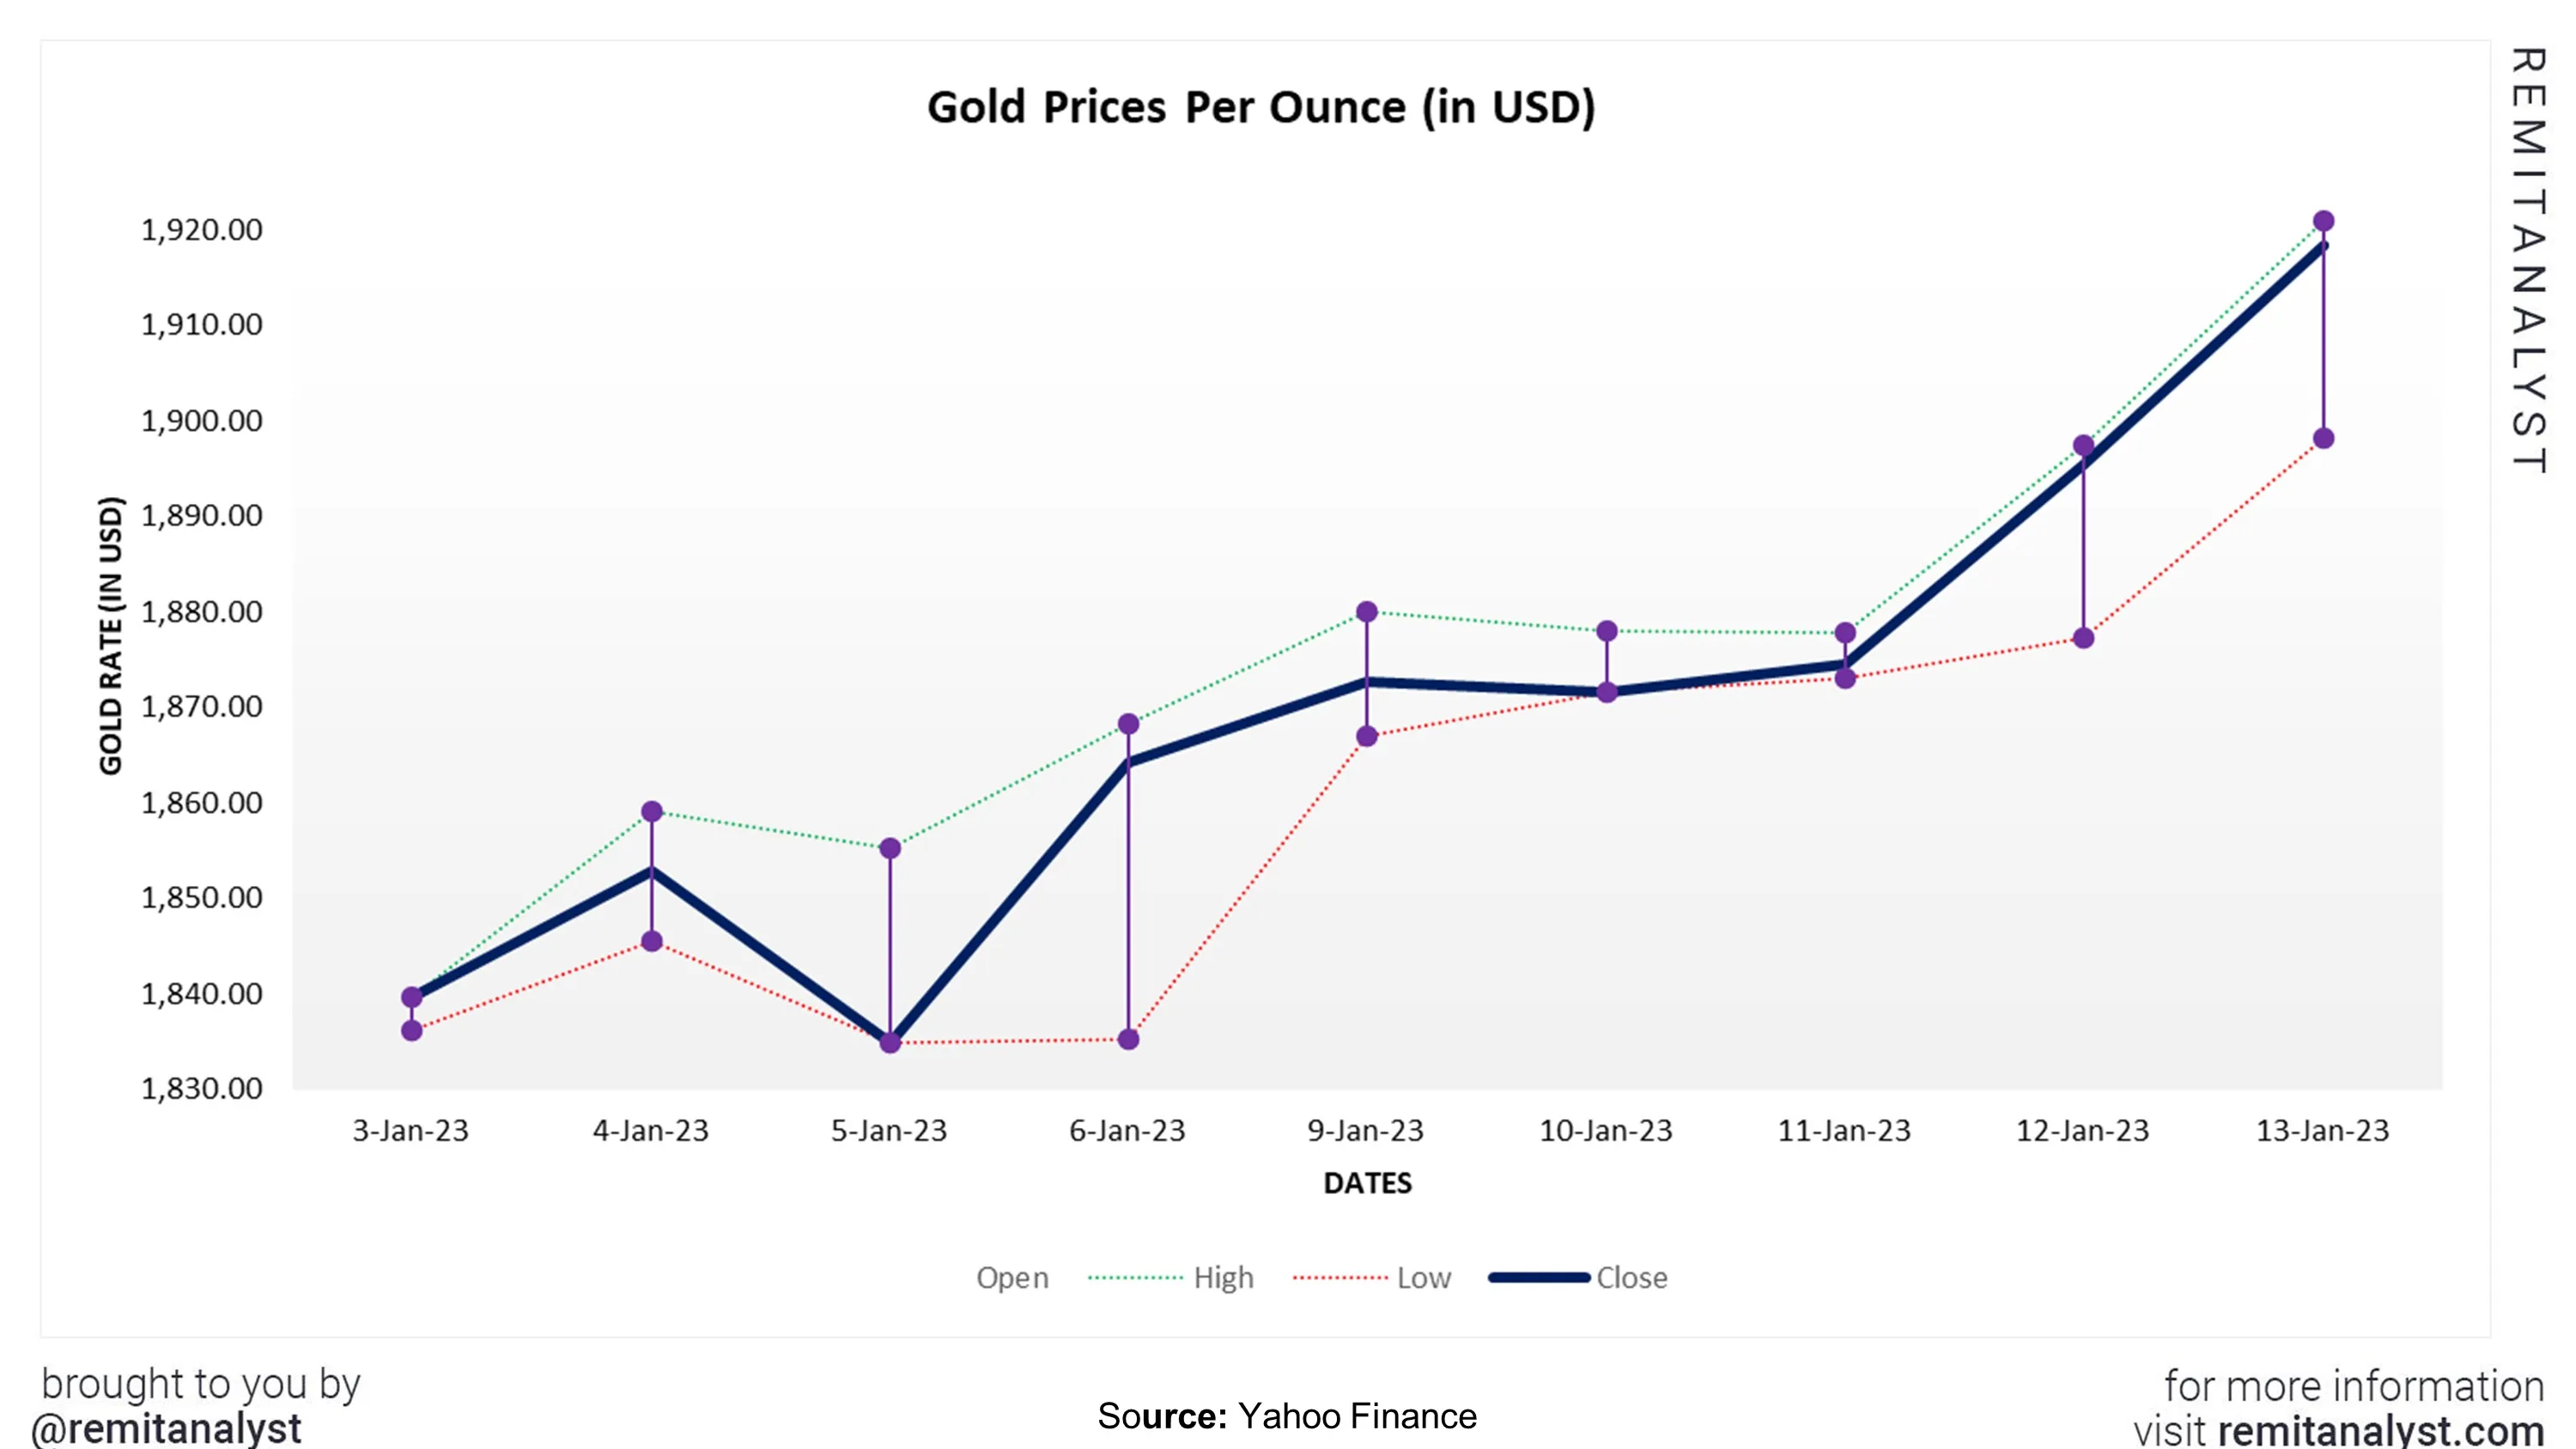 gold-prices-from-3-jan-2023-to-13-jan-2023